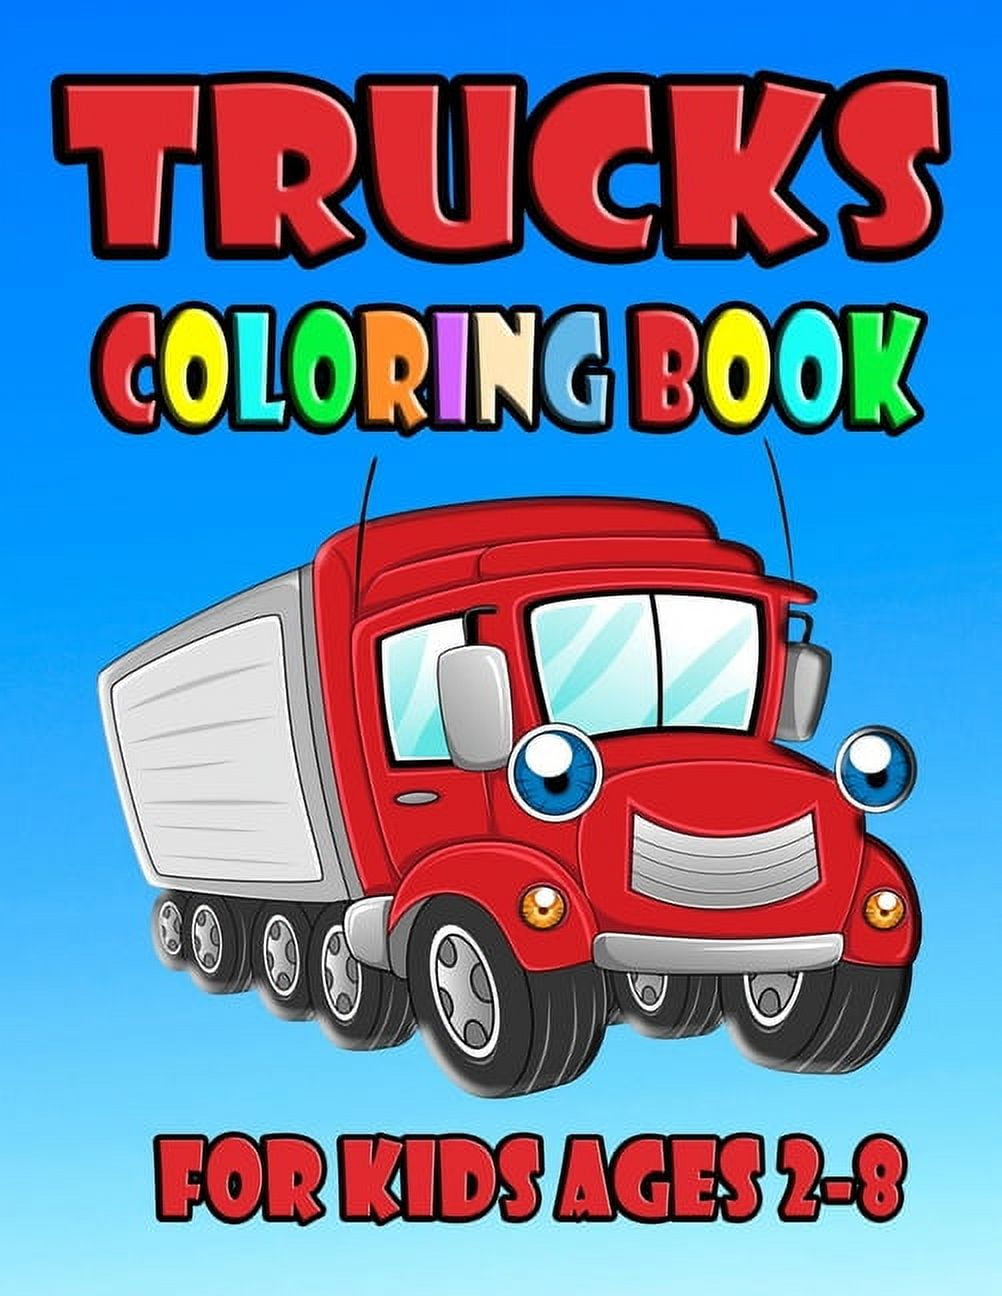 Coloring Books for Boys Ages 2-4 4-8, Cars, Trucks, and Planes: Coloring Books for Boys Ages 2-4 [Book]